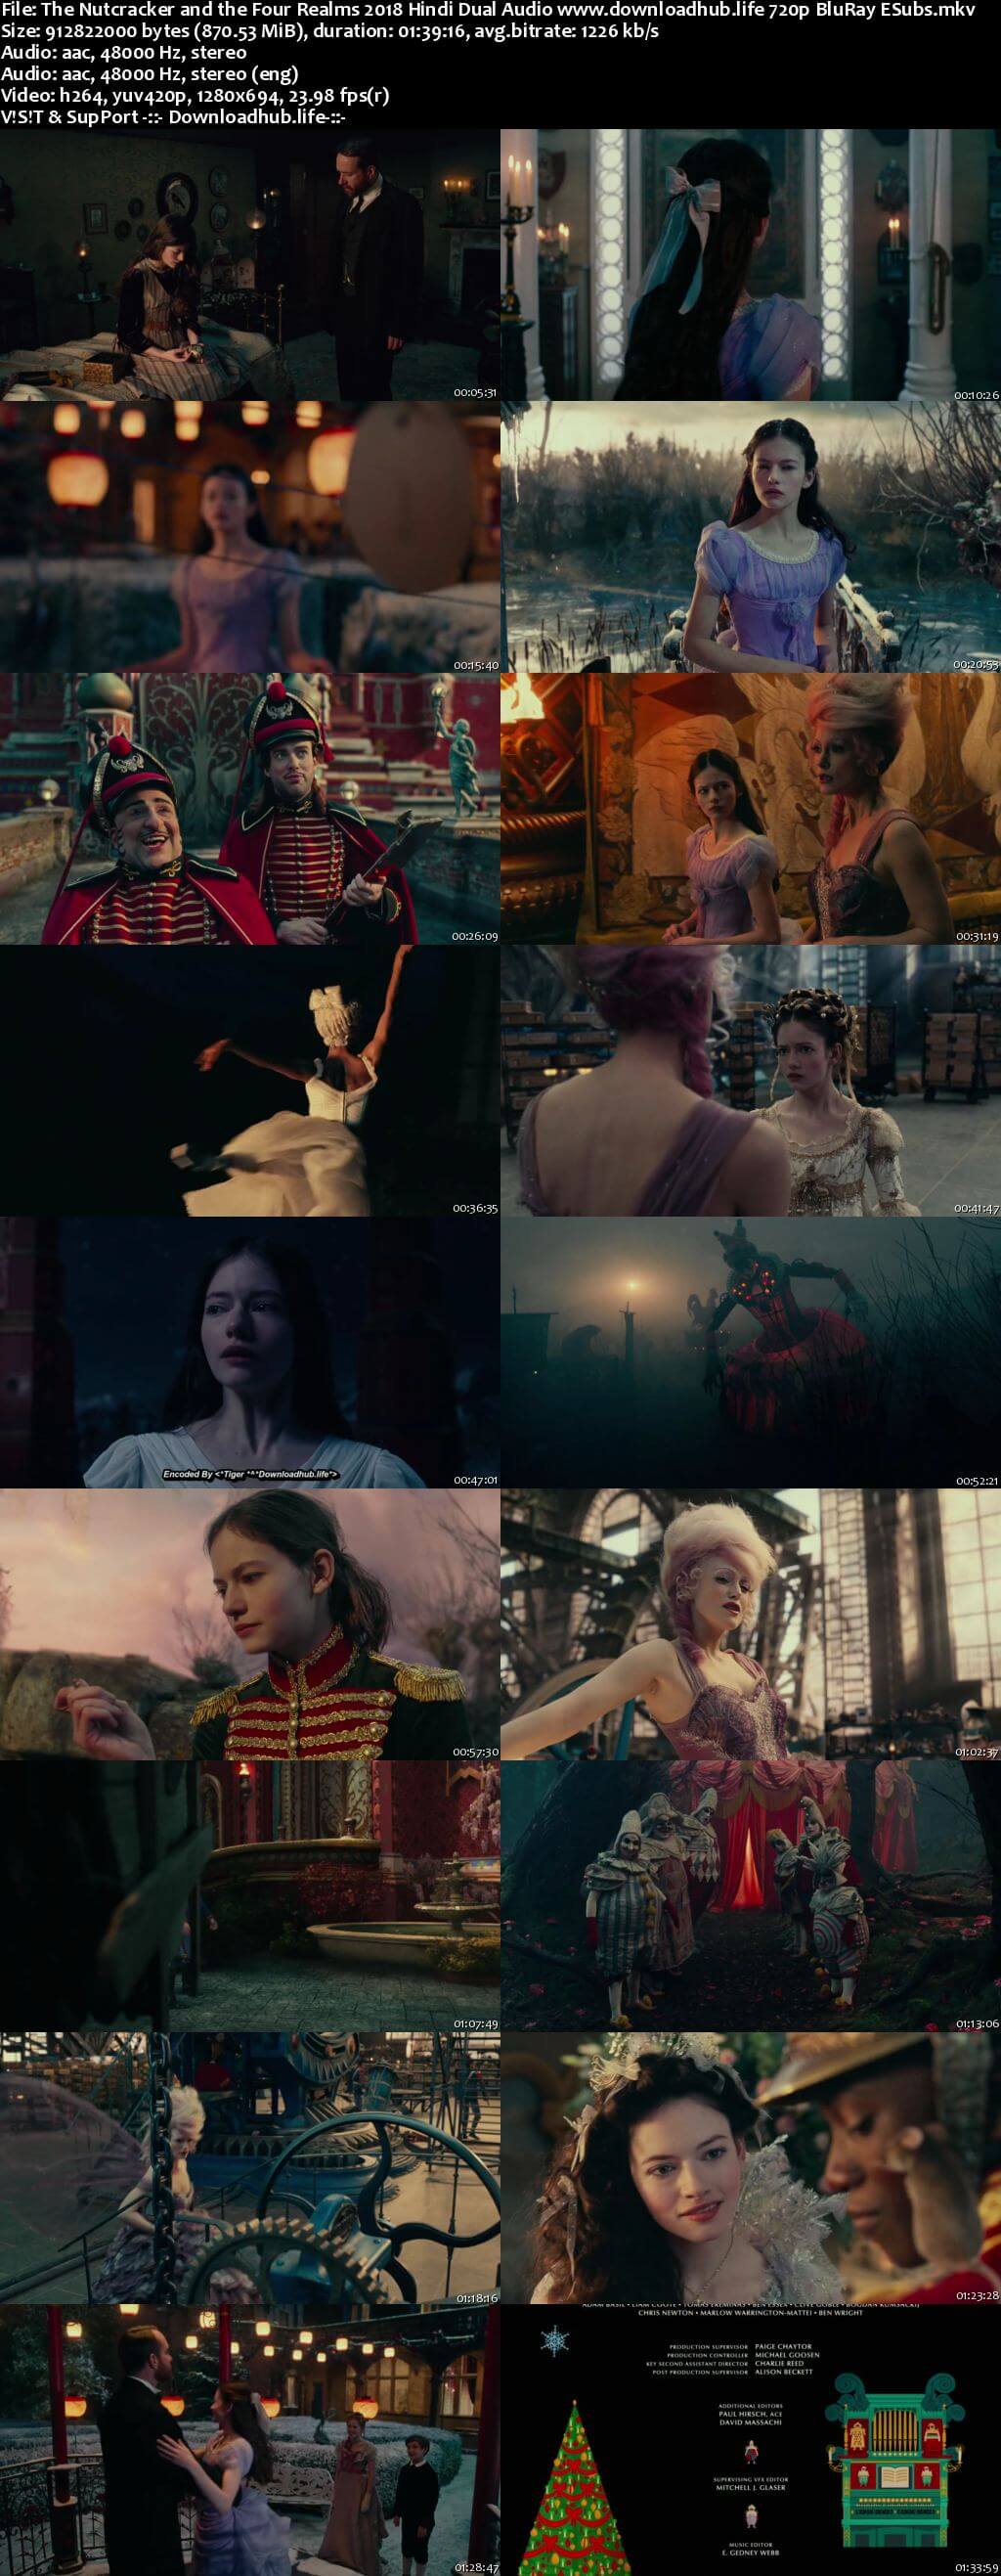 The Nutcracker and the Four Realms 2018 Hindi Dual Audio 720p BluRay ESubs